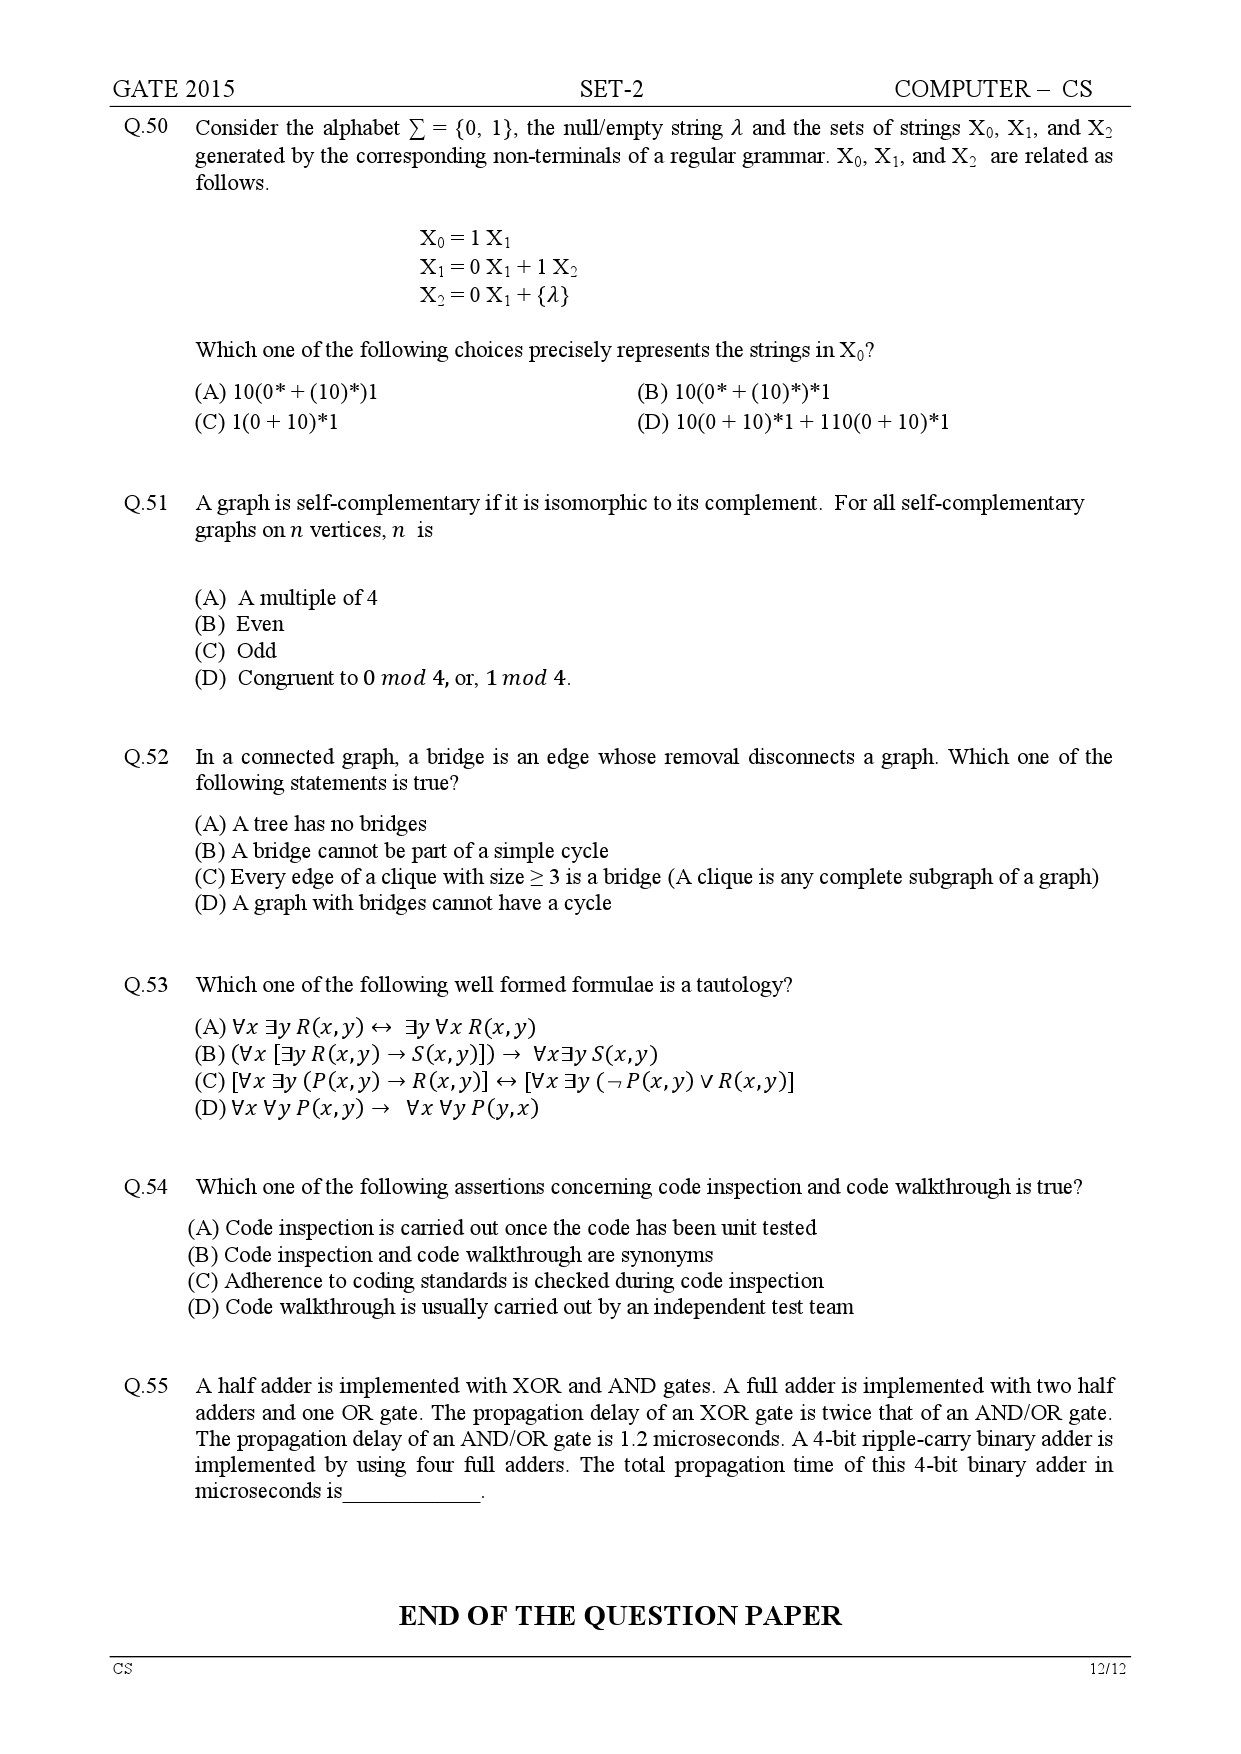 GATE Exam Question Paper 2015 Computer Science and Information Technology Set 2 12